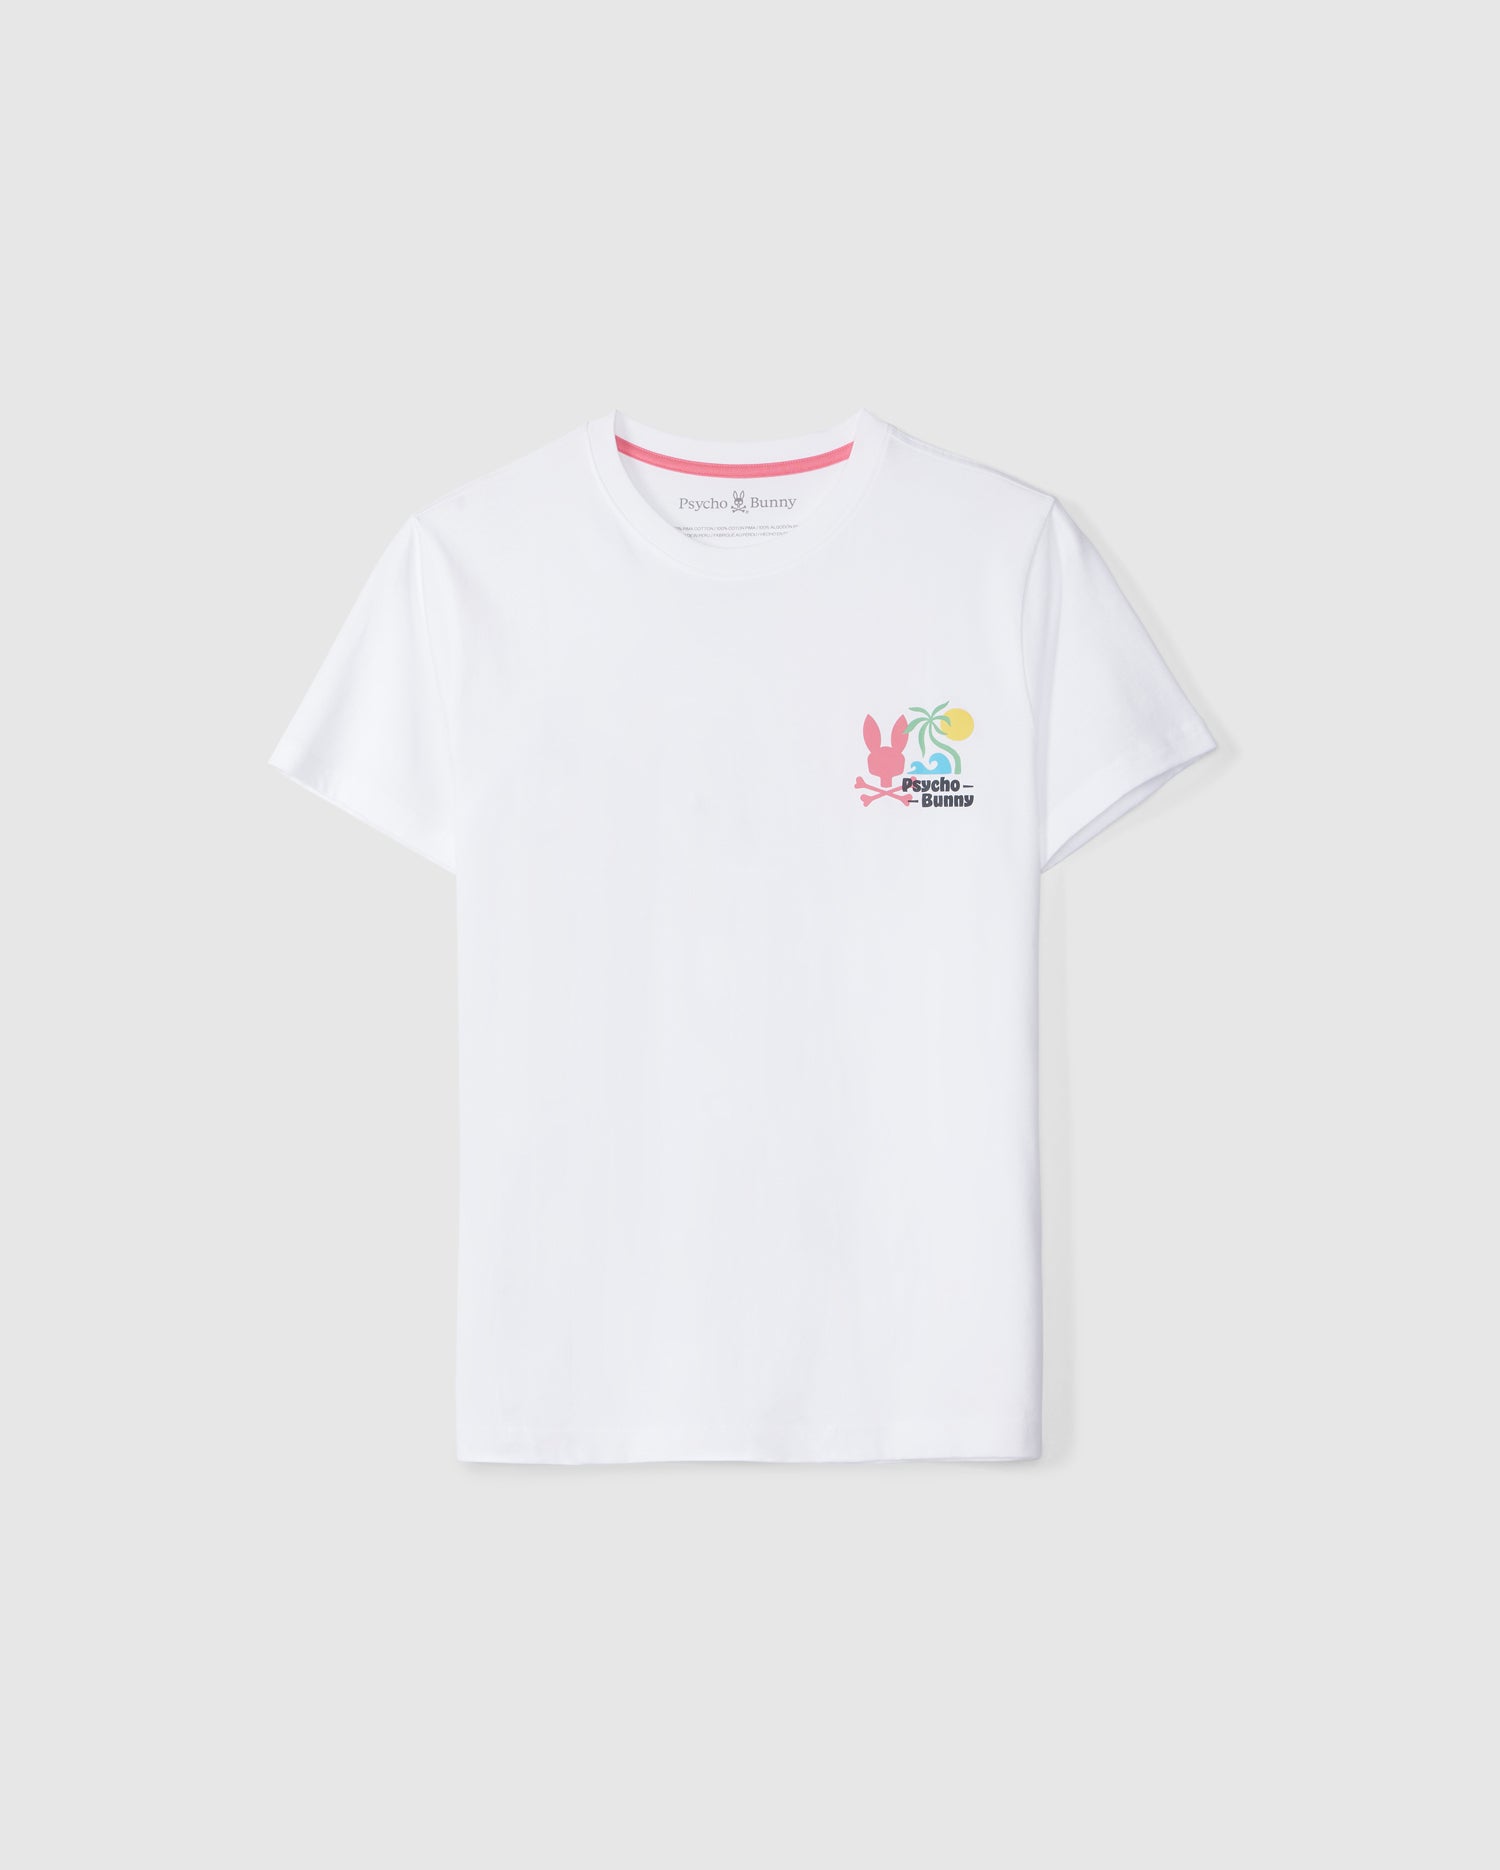 White KIDS MENTZ GRAPHIC TEE made from Peruvian Pima cotton, featuring a tropical-inspired logo of a cartoon rabbit and a carrot on the left chest area against a plain background by Psycho Bunny.